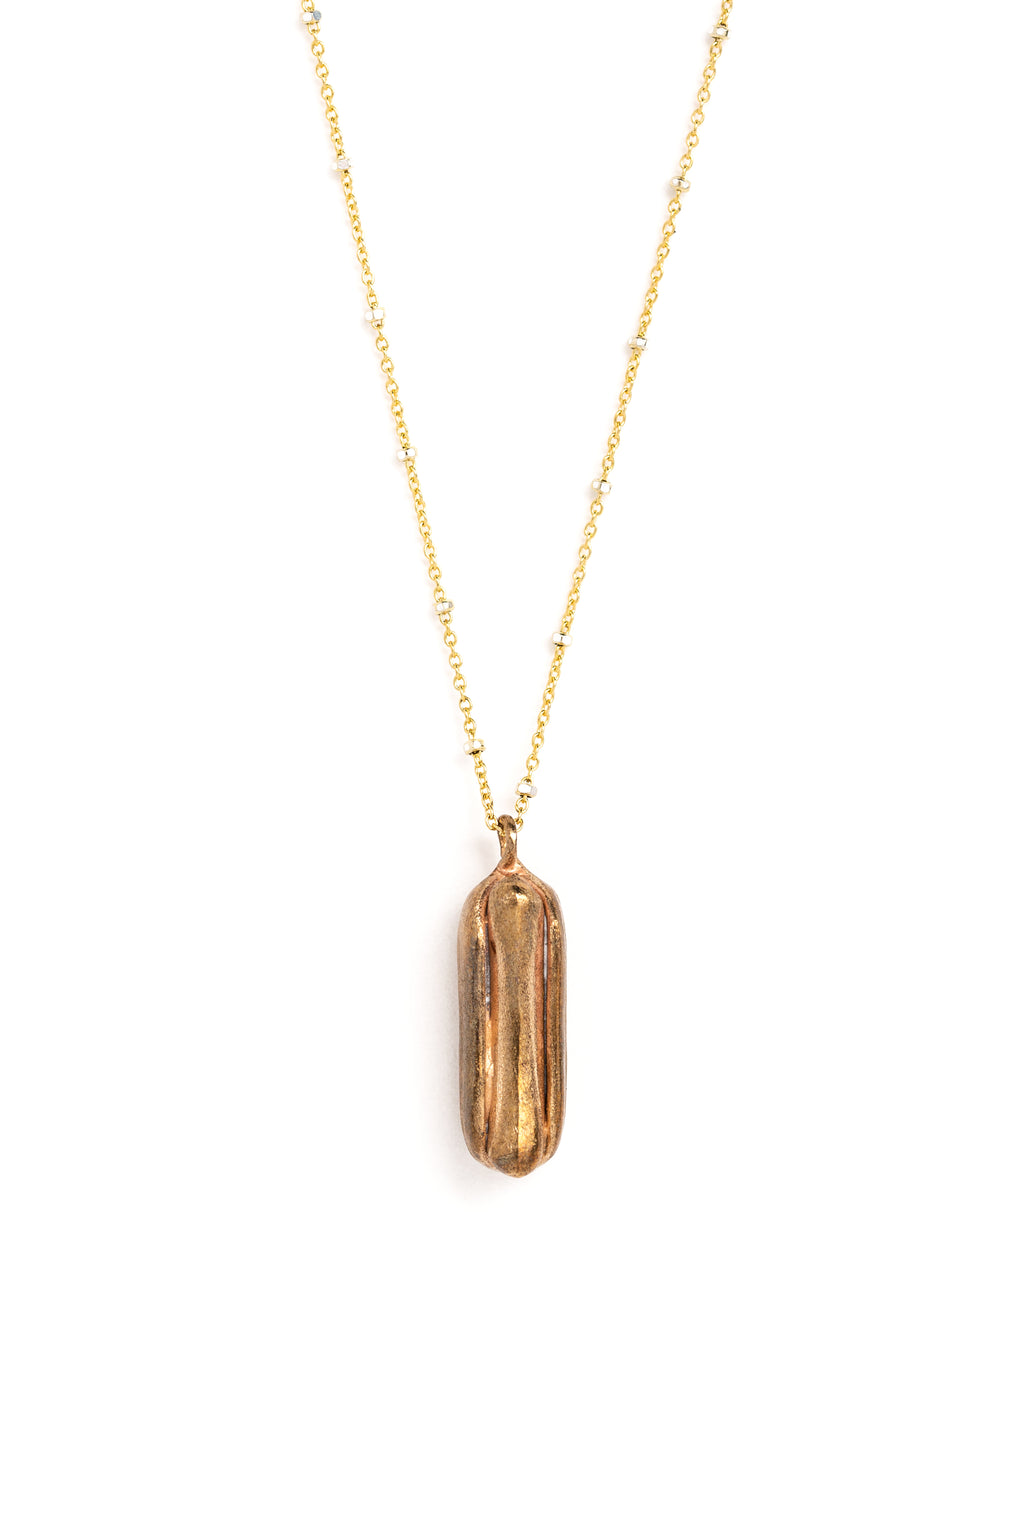 Cast Bronze Hot Dog Necklace on Gold Chain